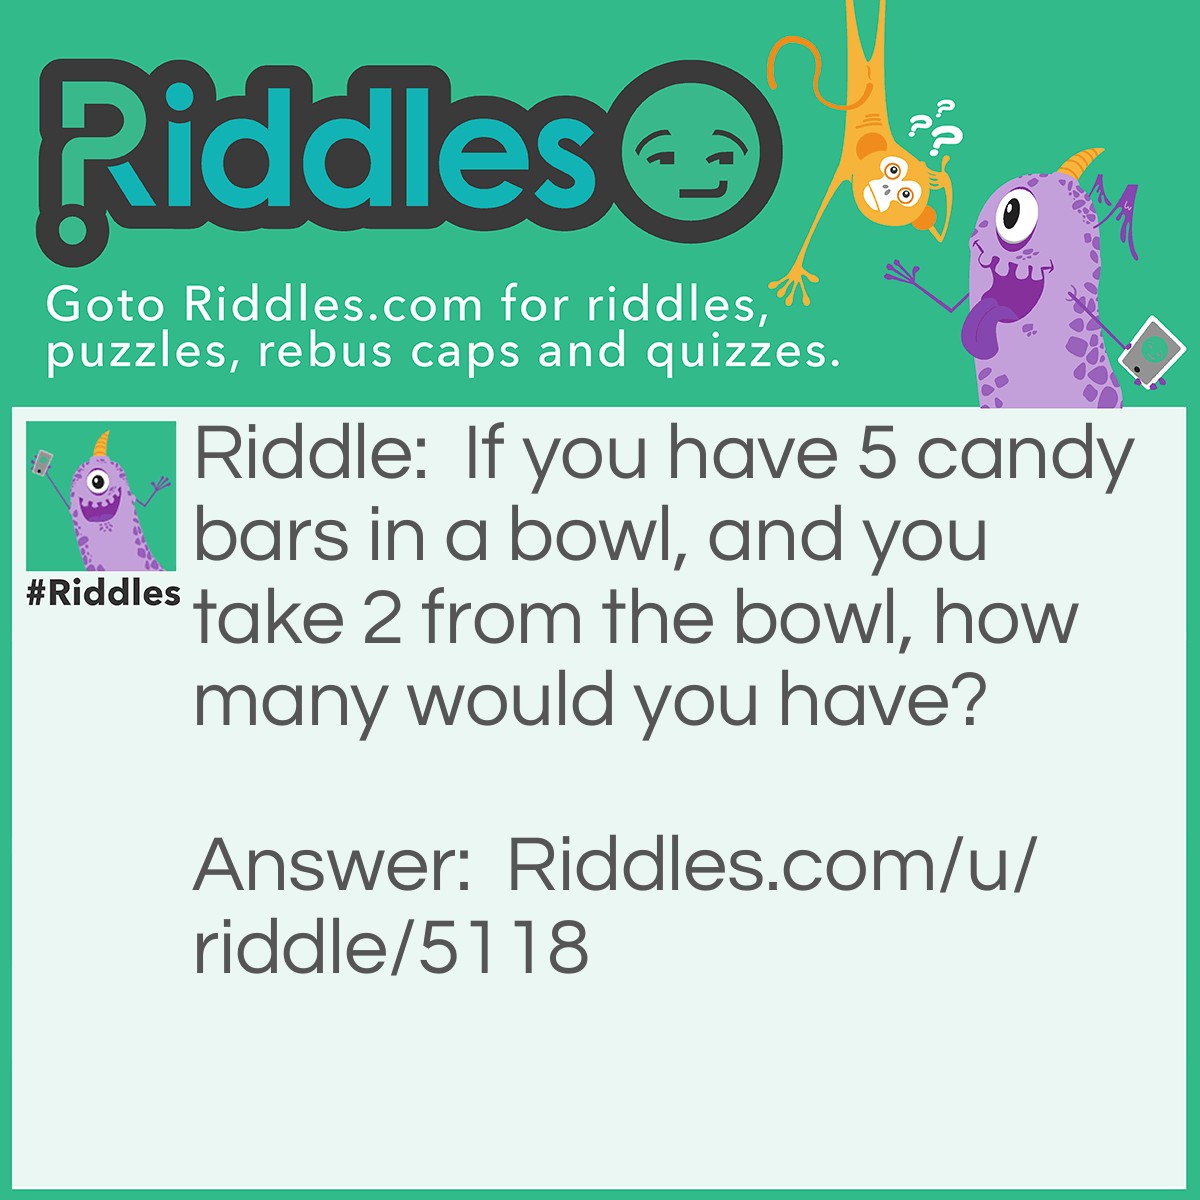 Riddle: If you have 5 candy bars in a bowl, and you take 2 from the bowl, how many would you have? Answer: 5, because you have 2 in your hand and 3 in the bowl.